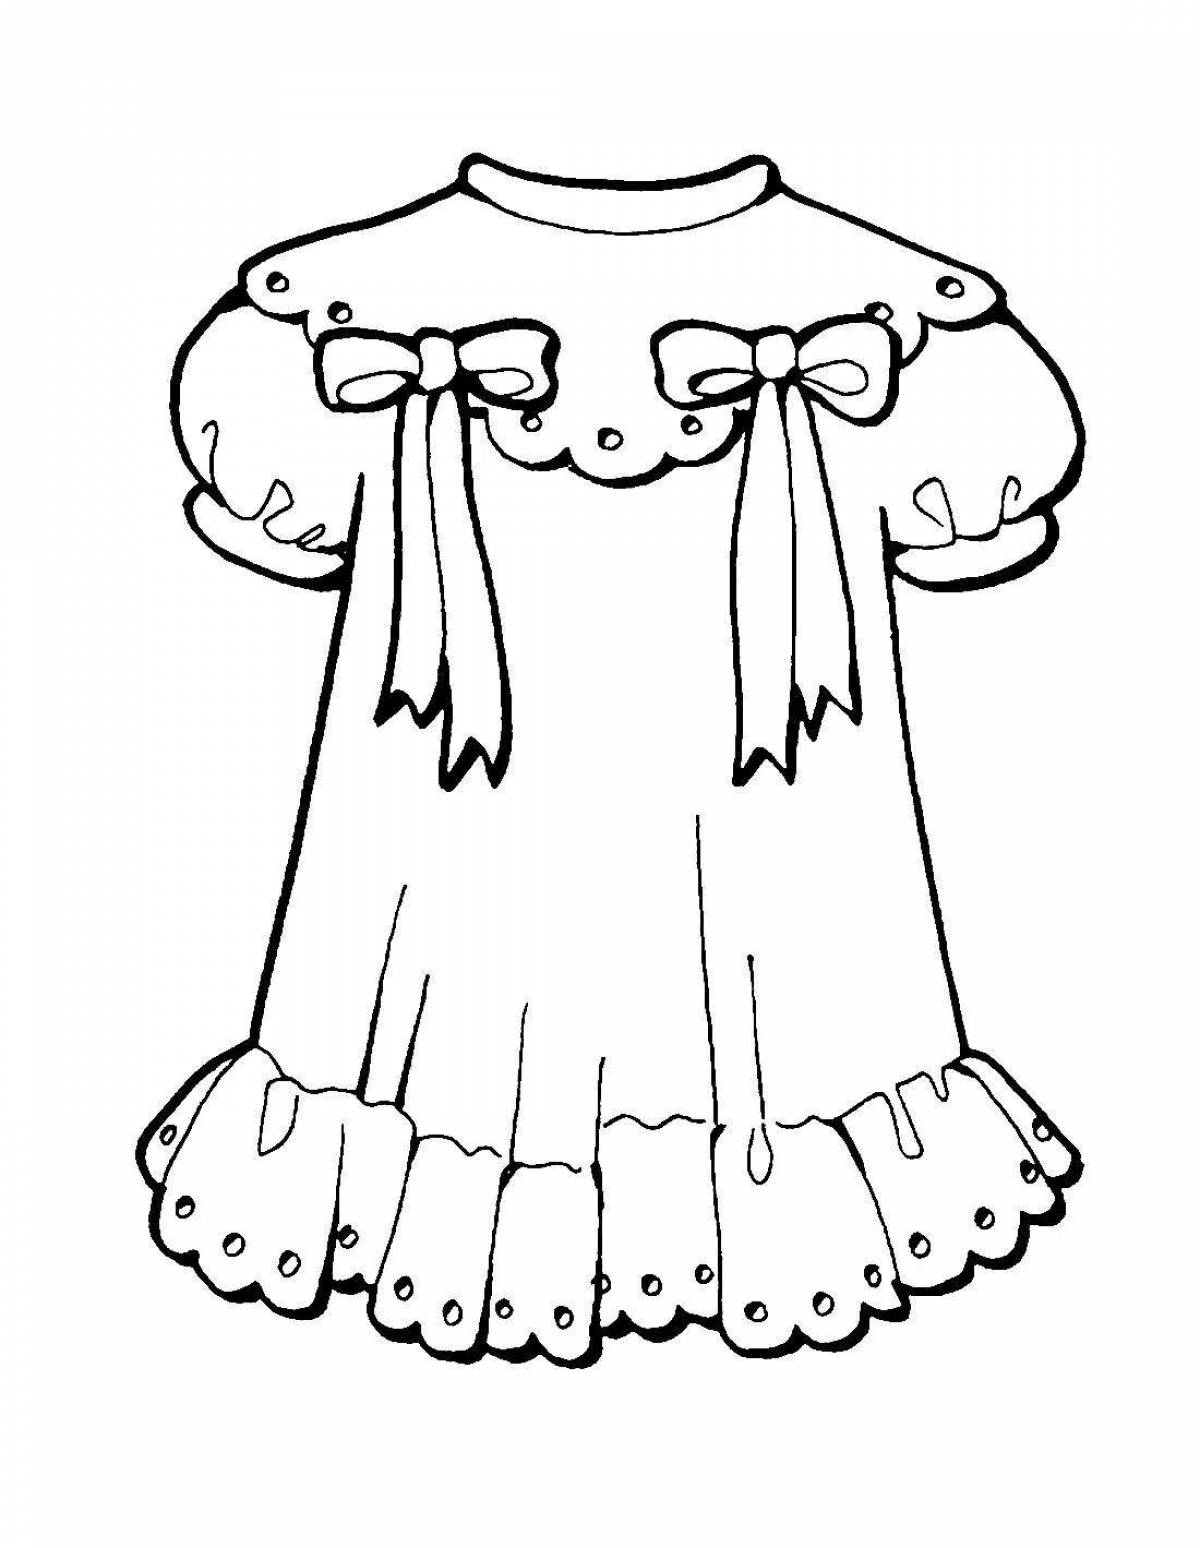 Fairy doll dress coloring book for children 4-5 years old